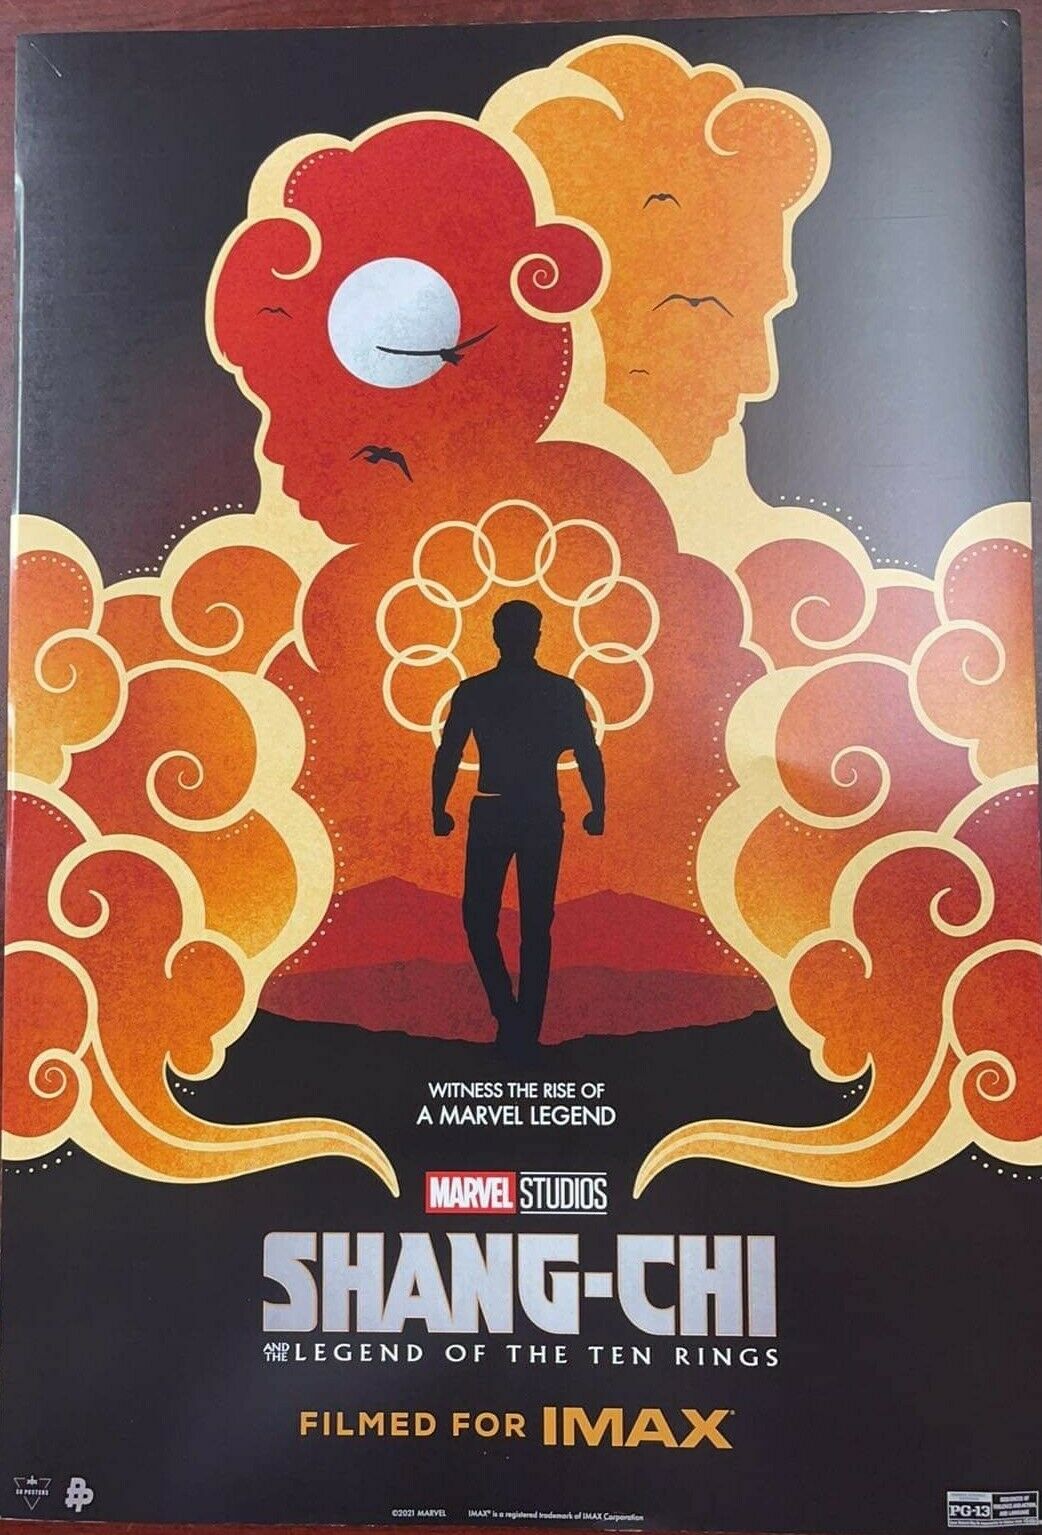 Shang Chi 2021 Imax Exclusive Mini Advance Theatrical Poster 13.5 X 20